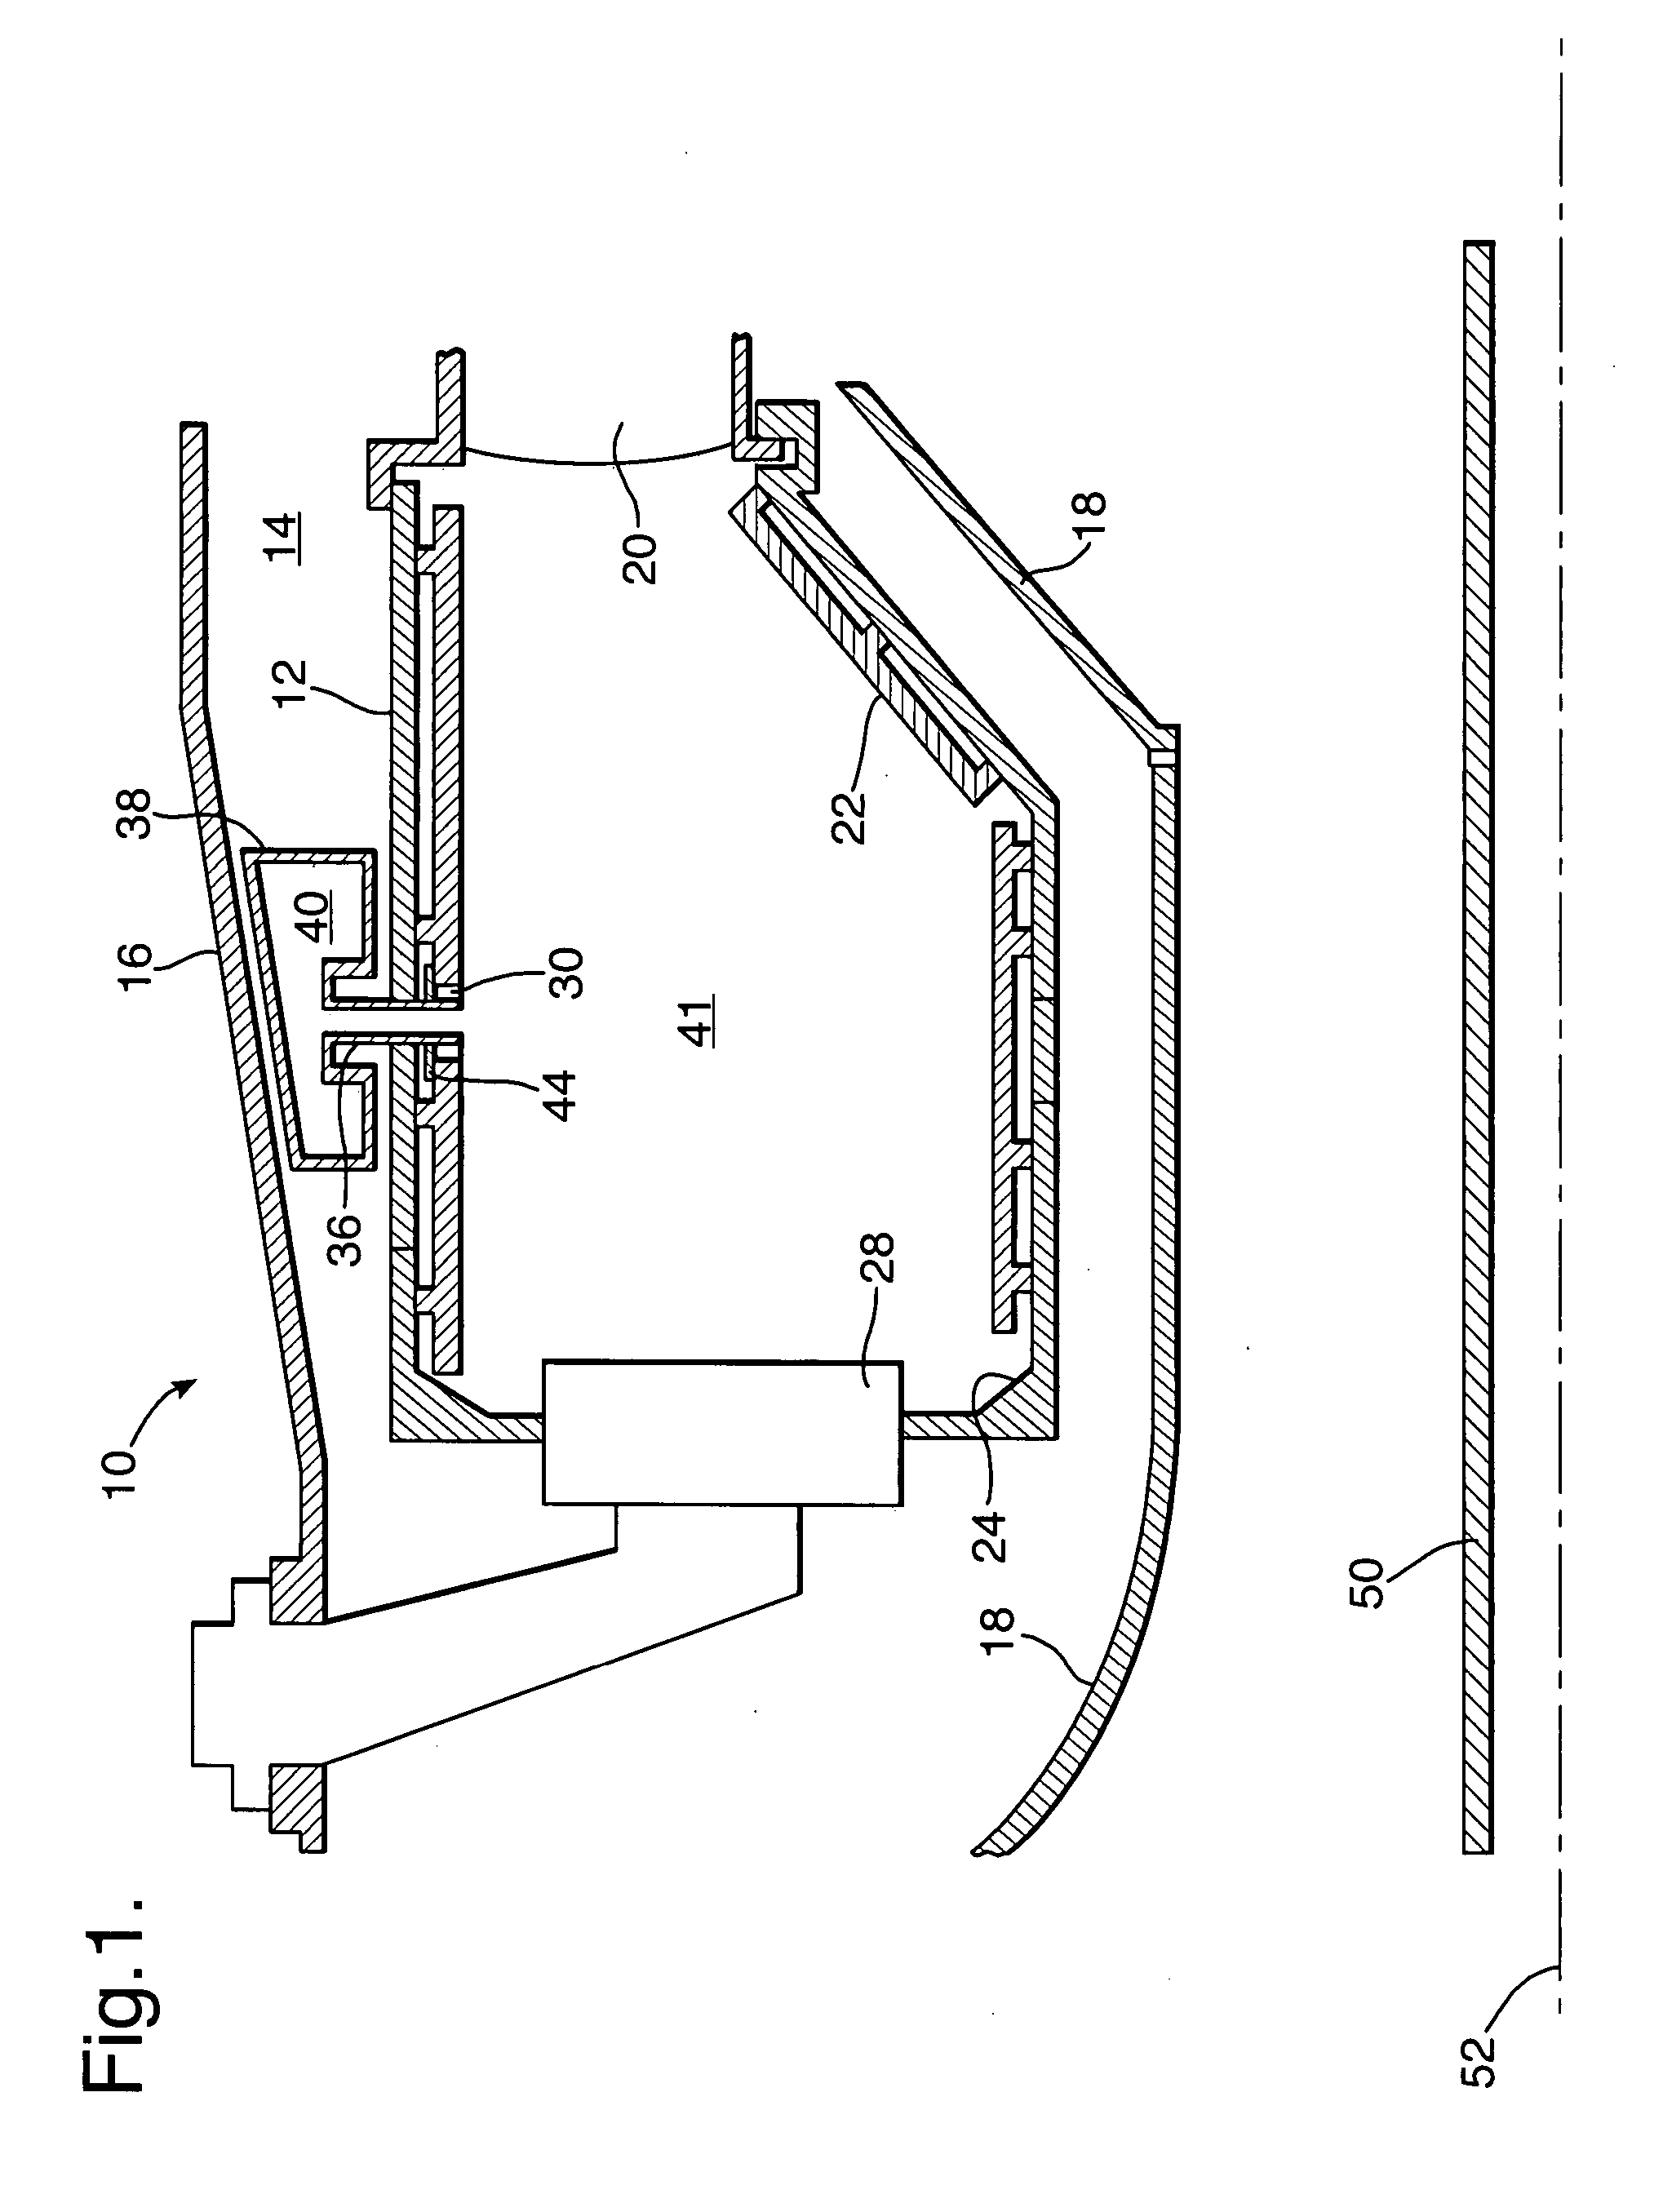 Combustion chamber for a gas turbine engine